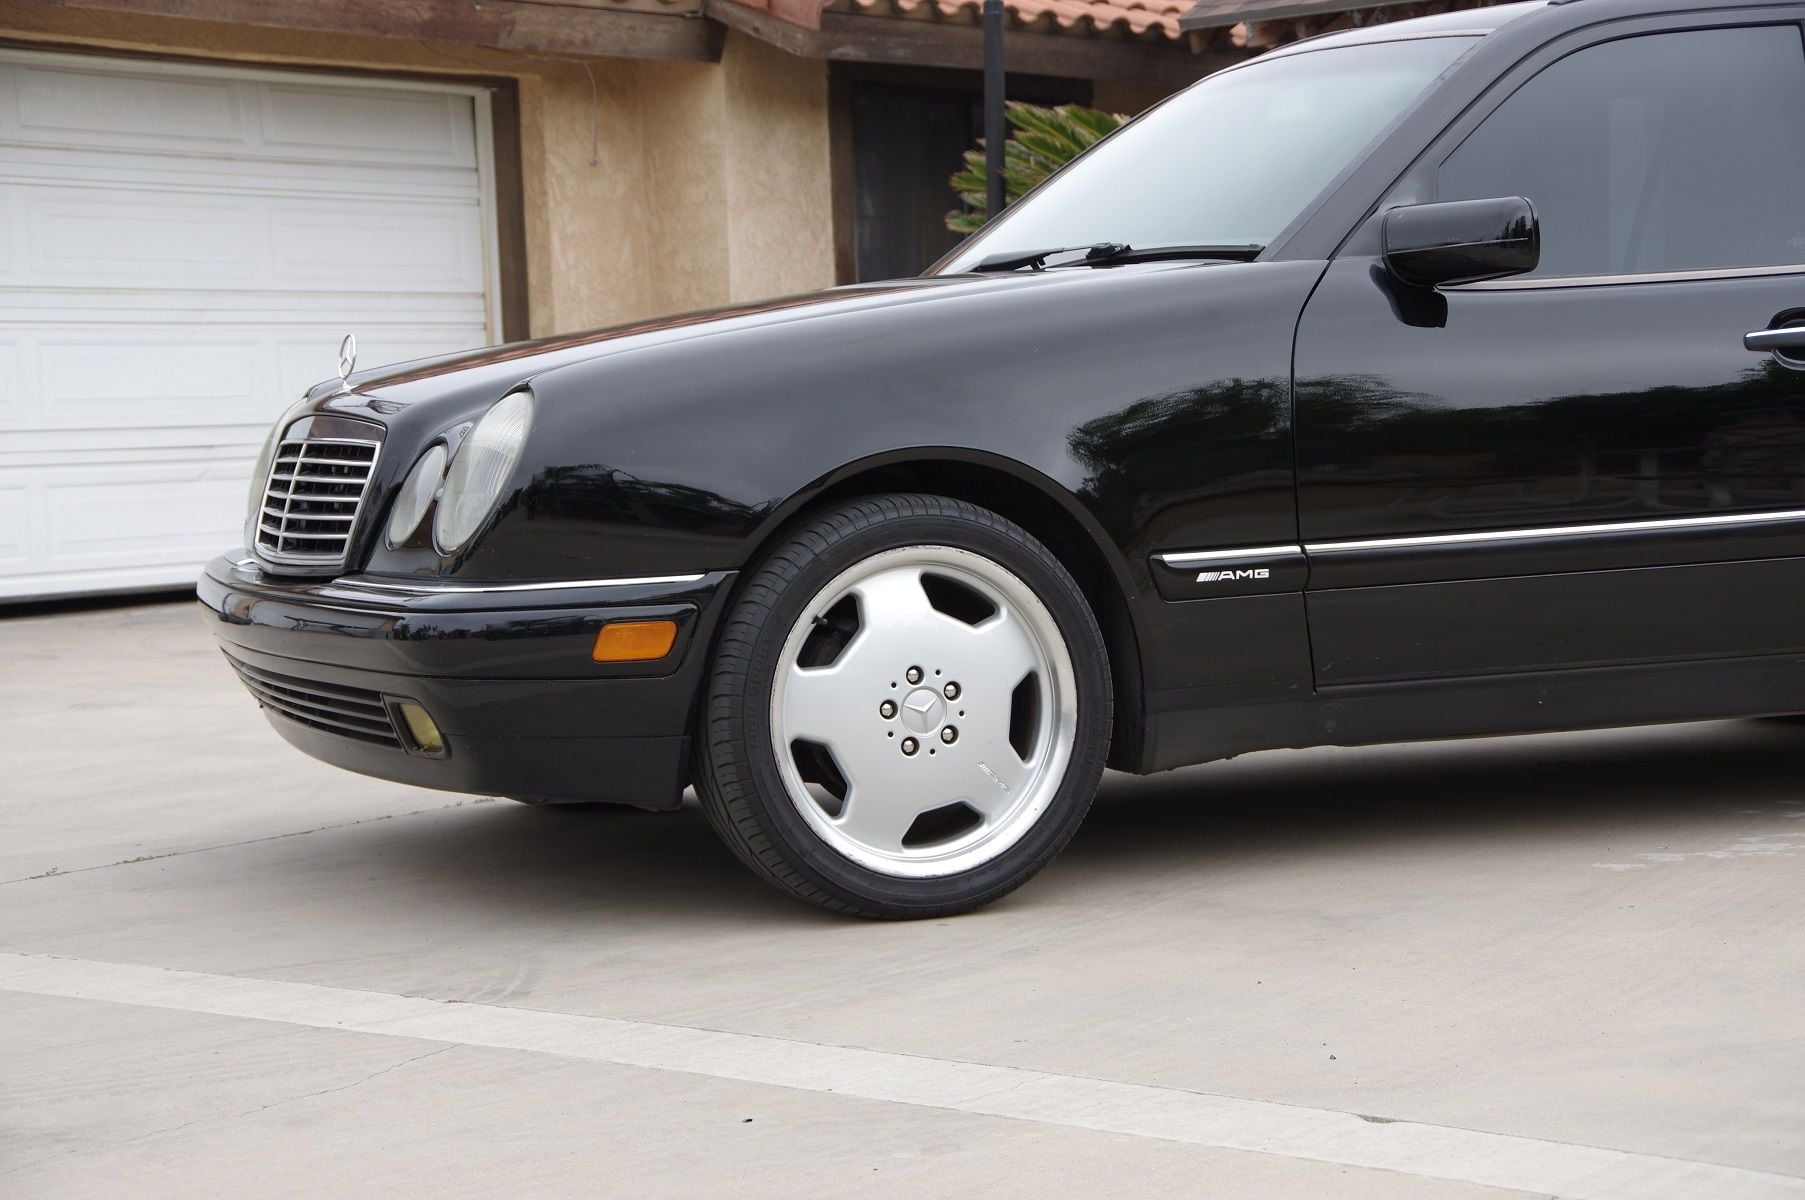 1999 Mercedes-Benz E320 - 1999 Mercedes Benz E320 Wagon Clean Title - Used - VIN WDBJH65F2XA746269 - 242,000 Miles - 6 cyl - 2WD - Automatic - Wagon - Black - Riverside, CA 92504, United States